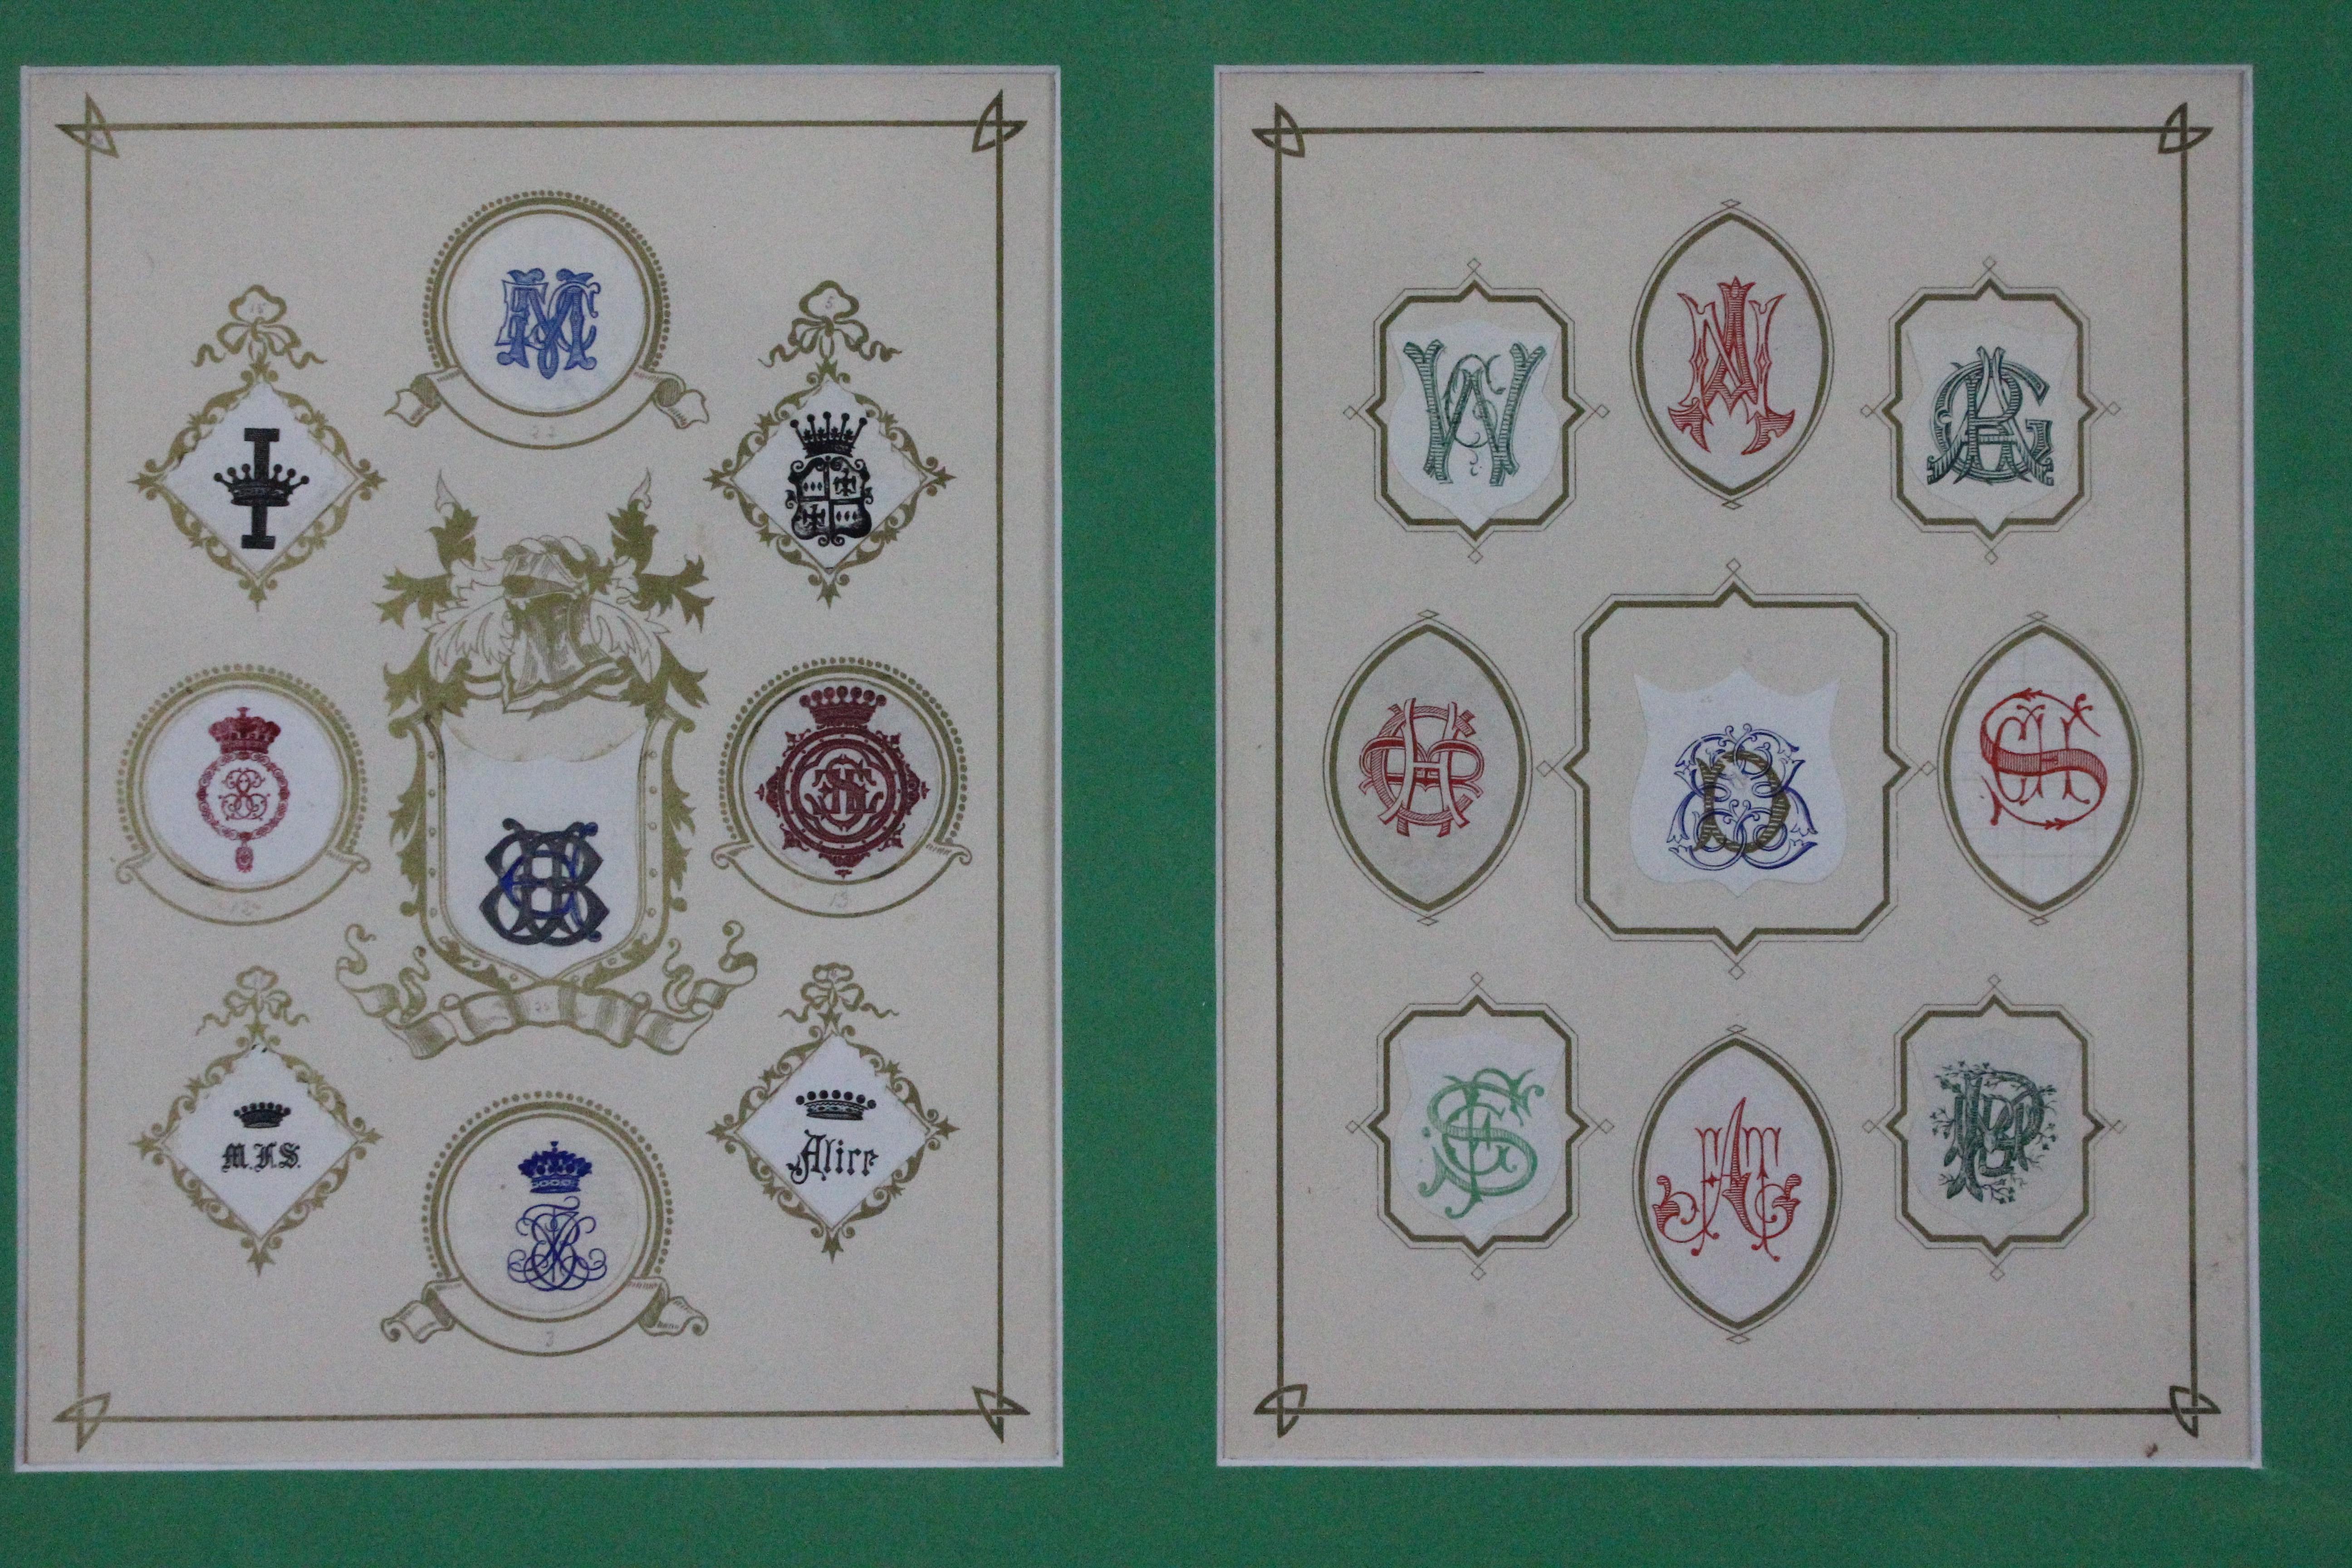 Rare (8) panel/ (9) per plate framed bespoke stationary letterhead c1930s crests together with (3) preparatory sheets mounted on verso all custom framed

Image Sz: 14 1/4